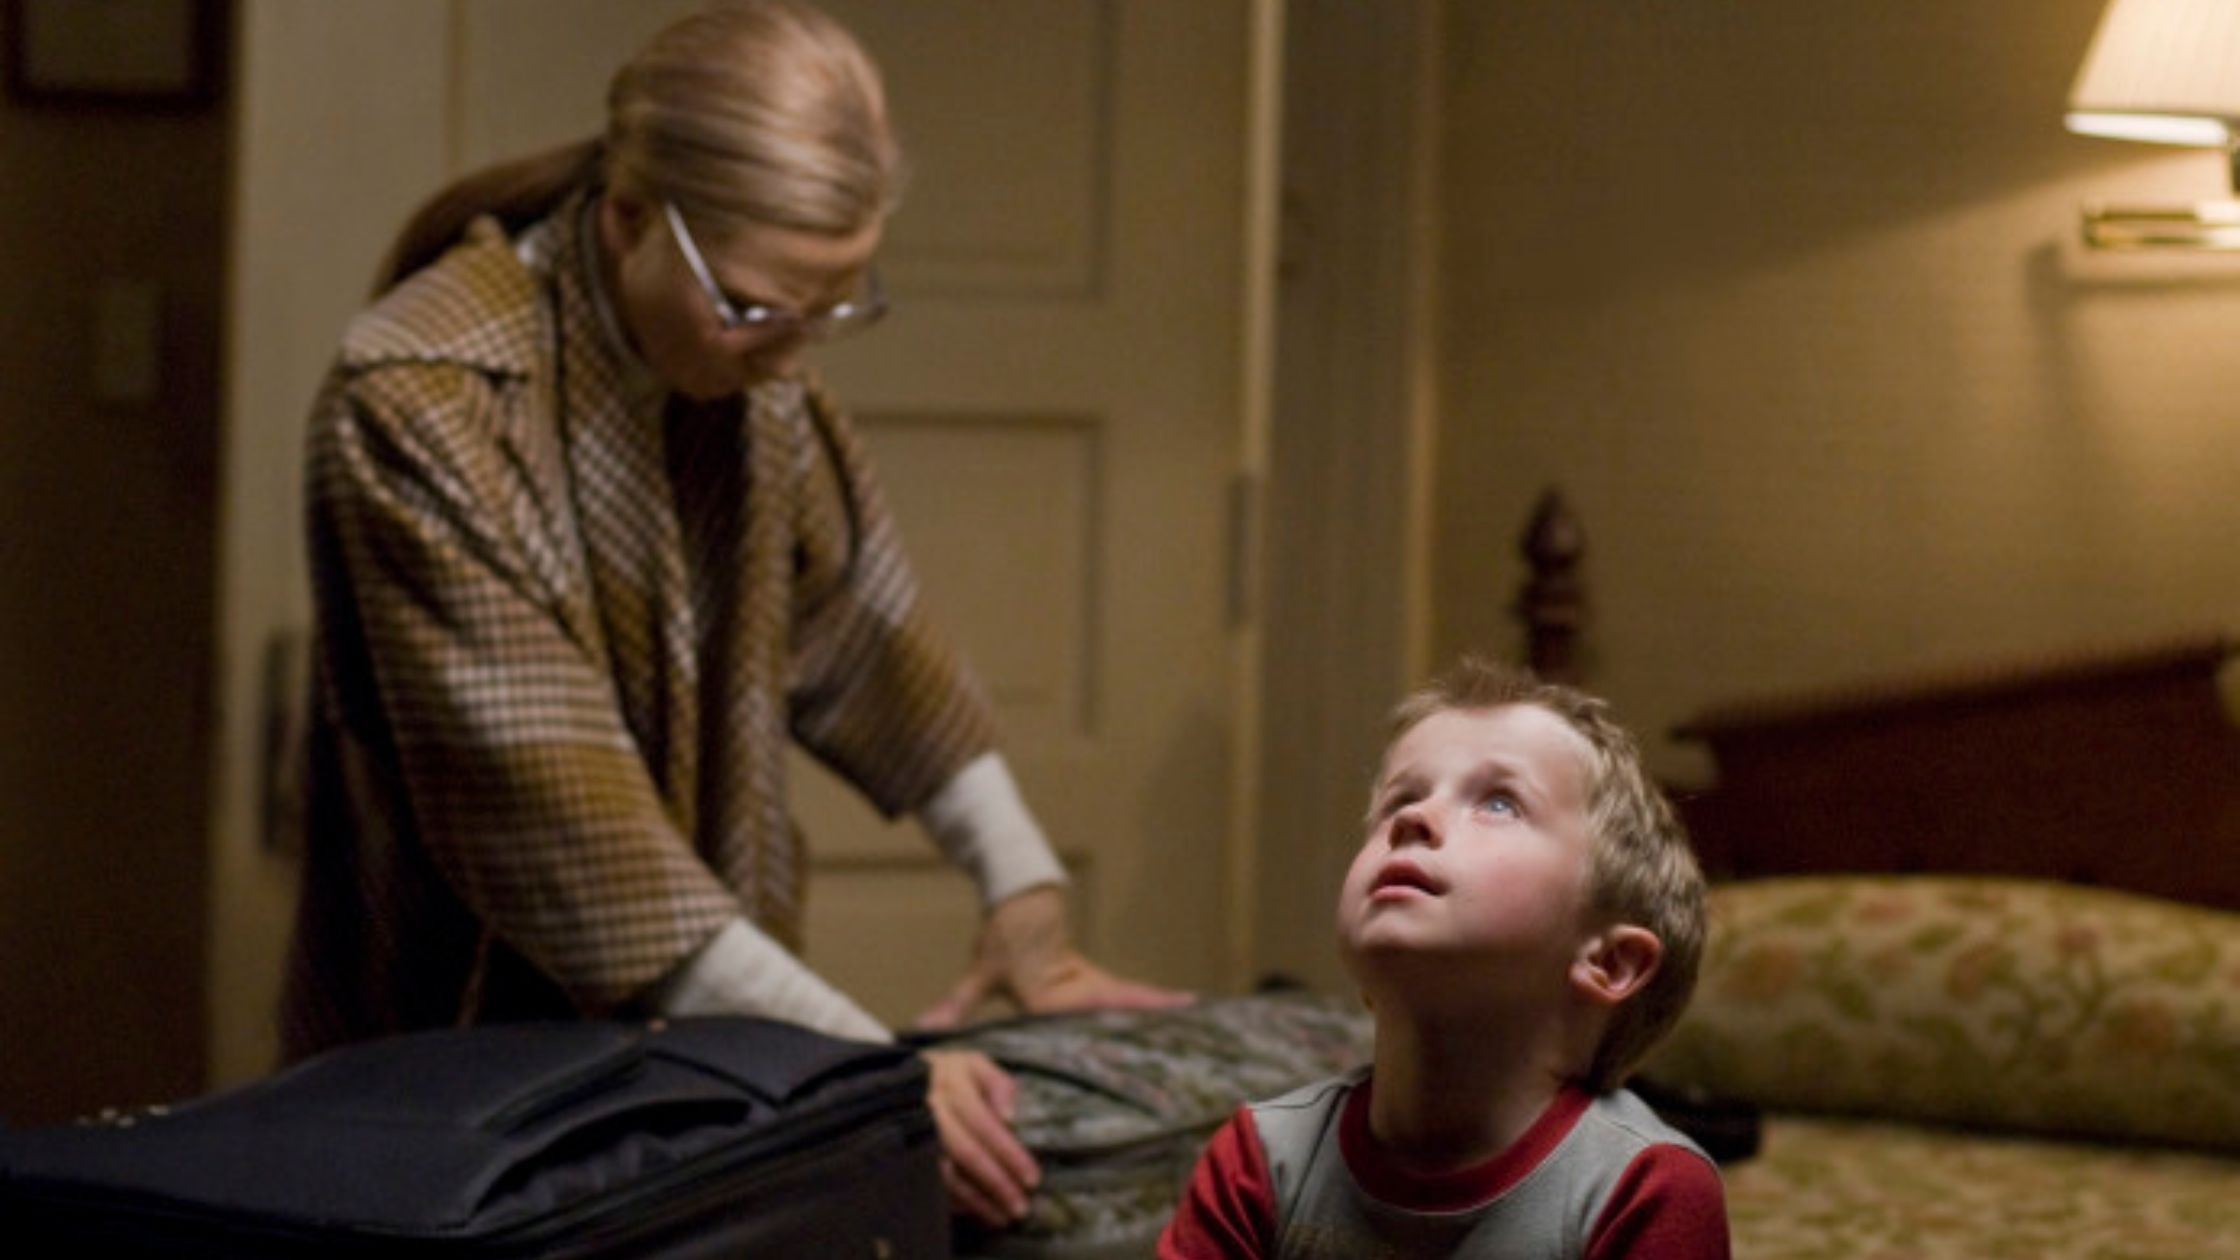 A scene from the film The curious case of Benjamin Button